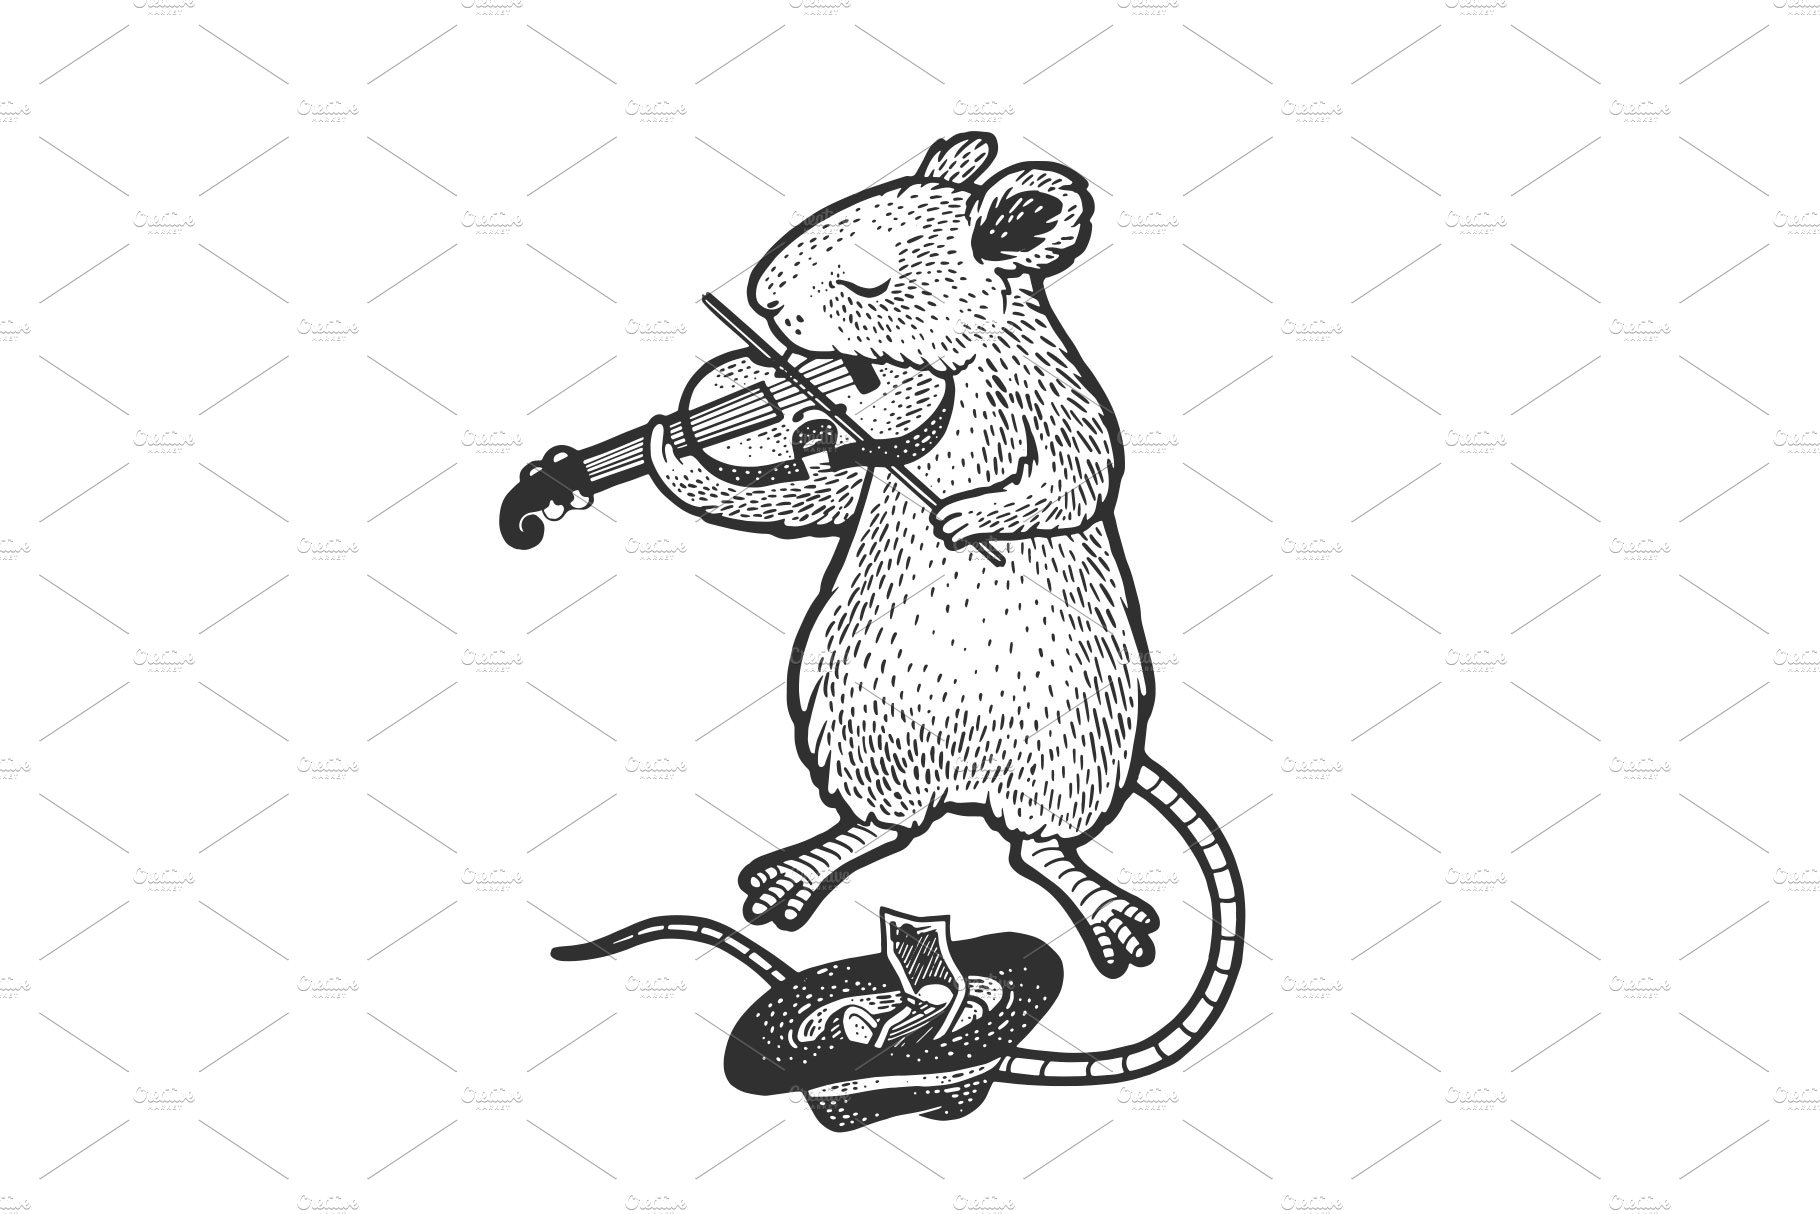 mouse plays the violin sketch vector cover image.